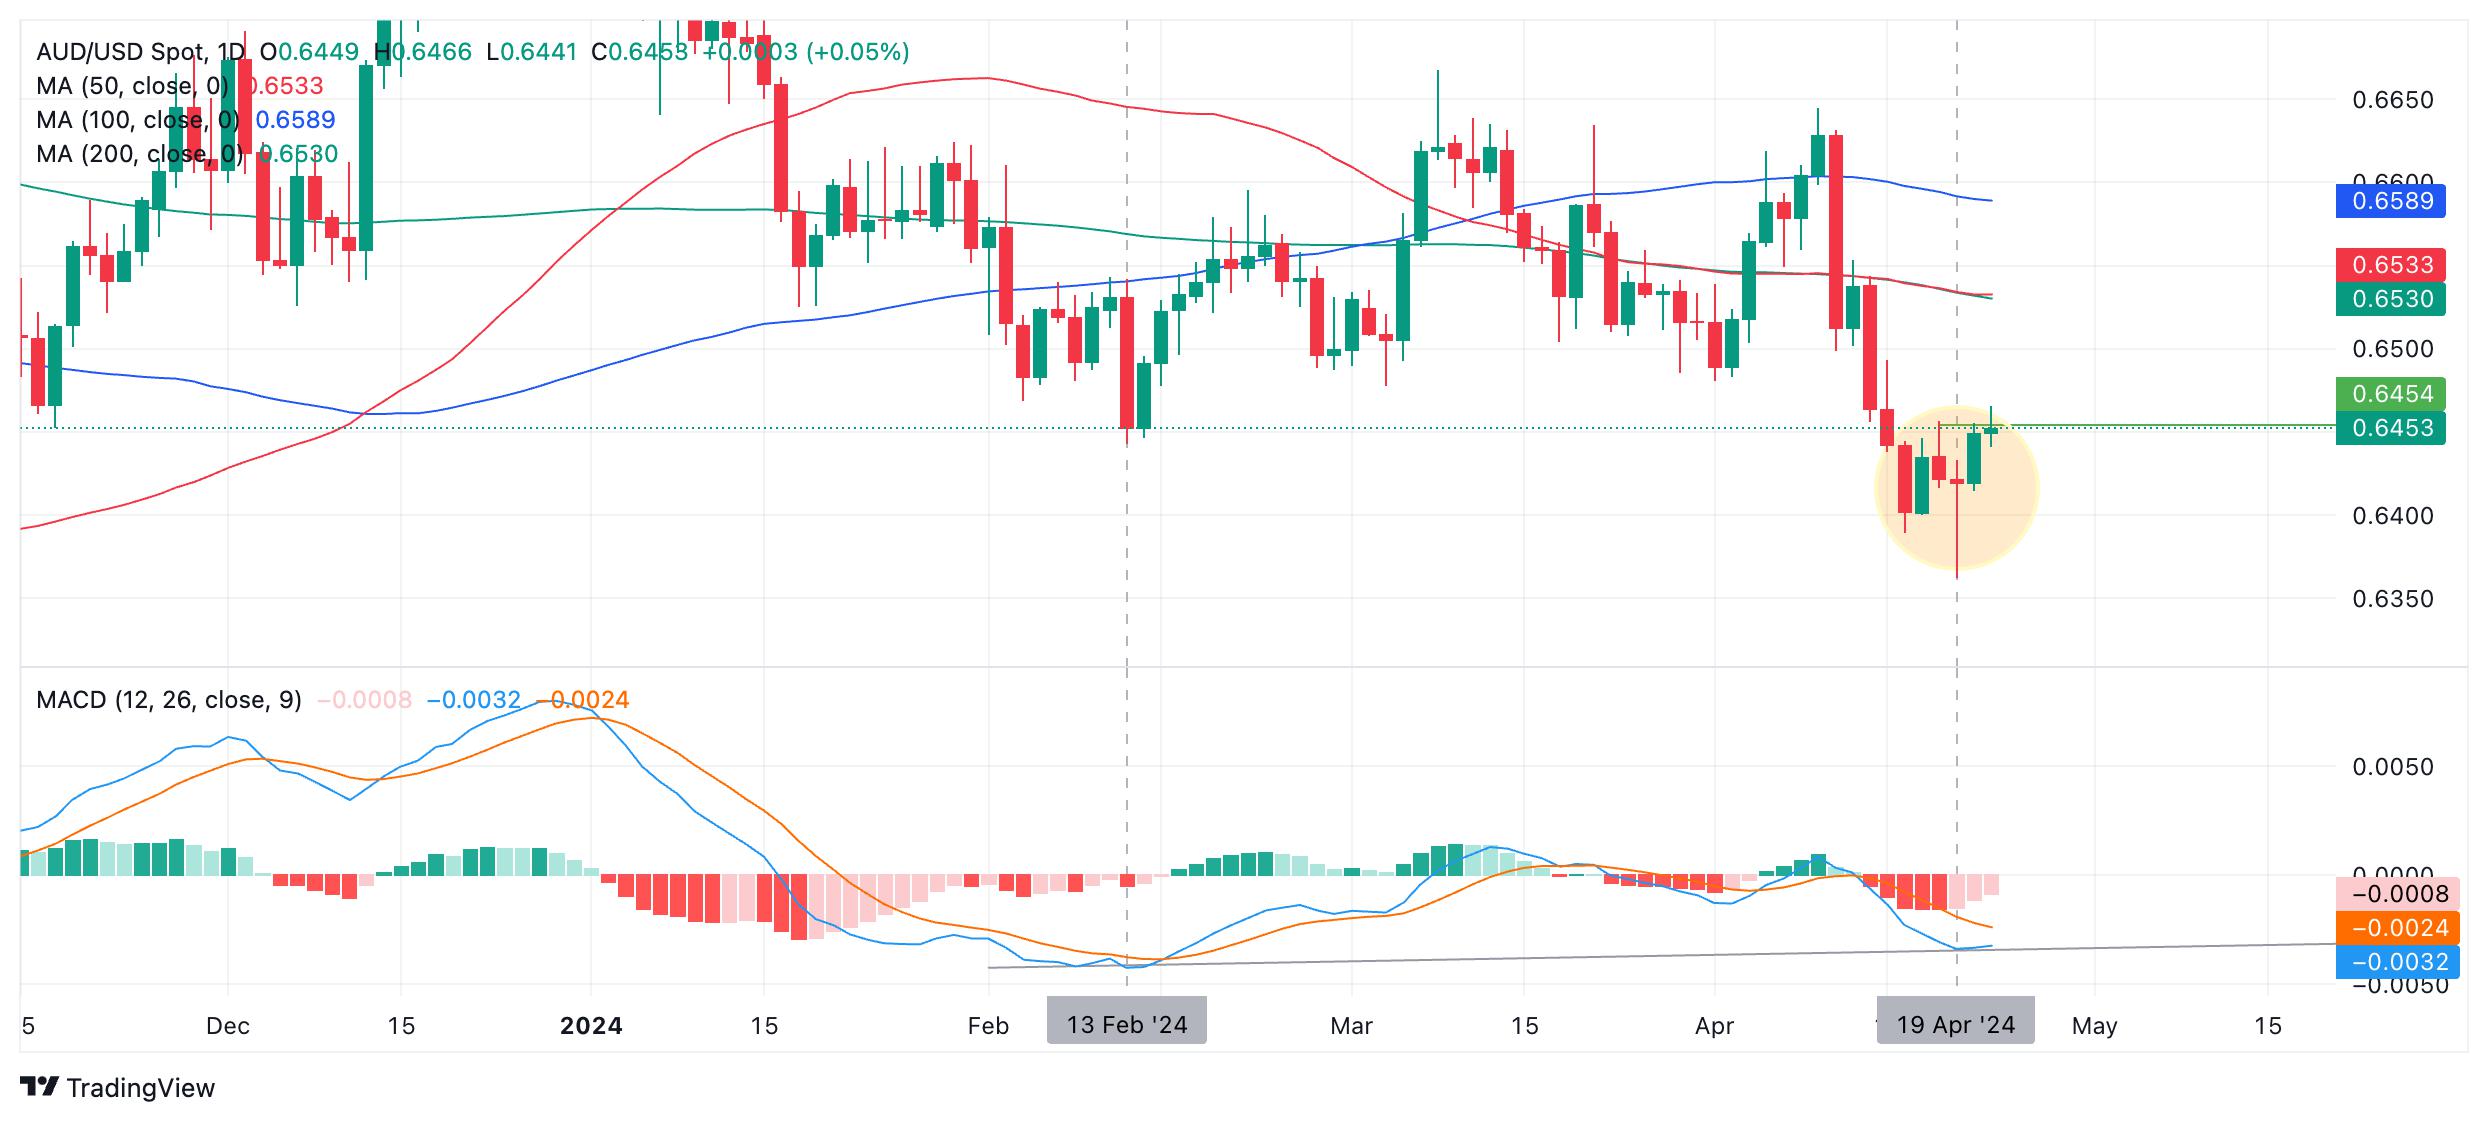 AUD/USD Price Analysis: Despite signs this is probably not a bullish reversal